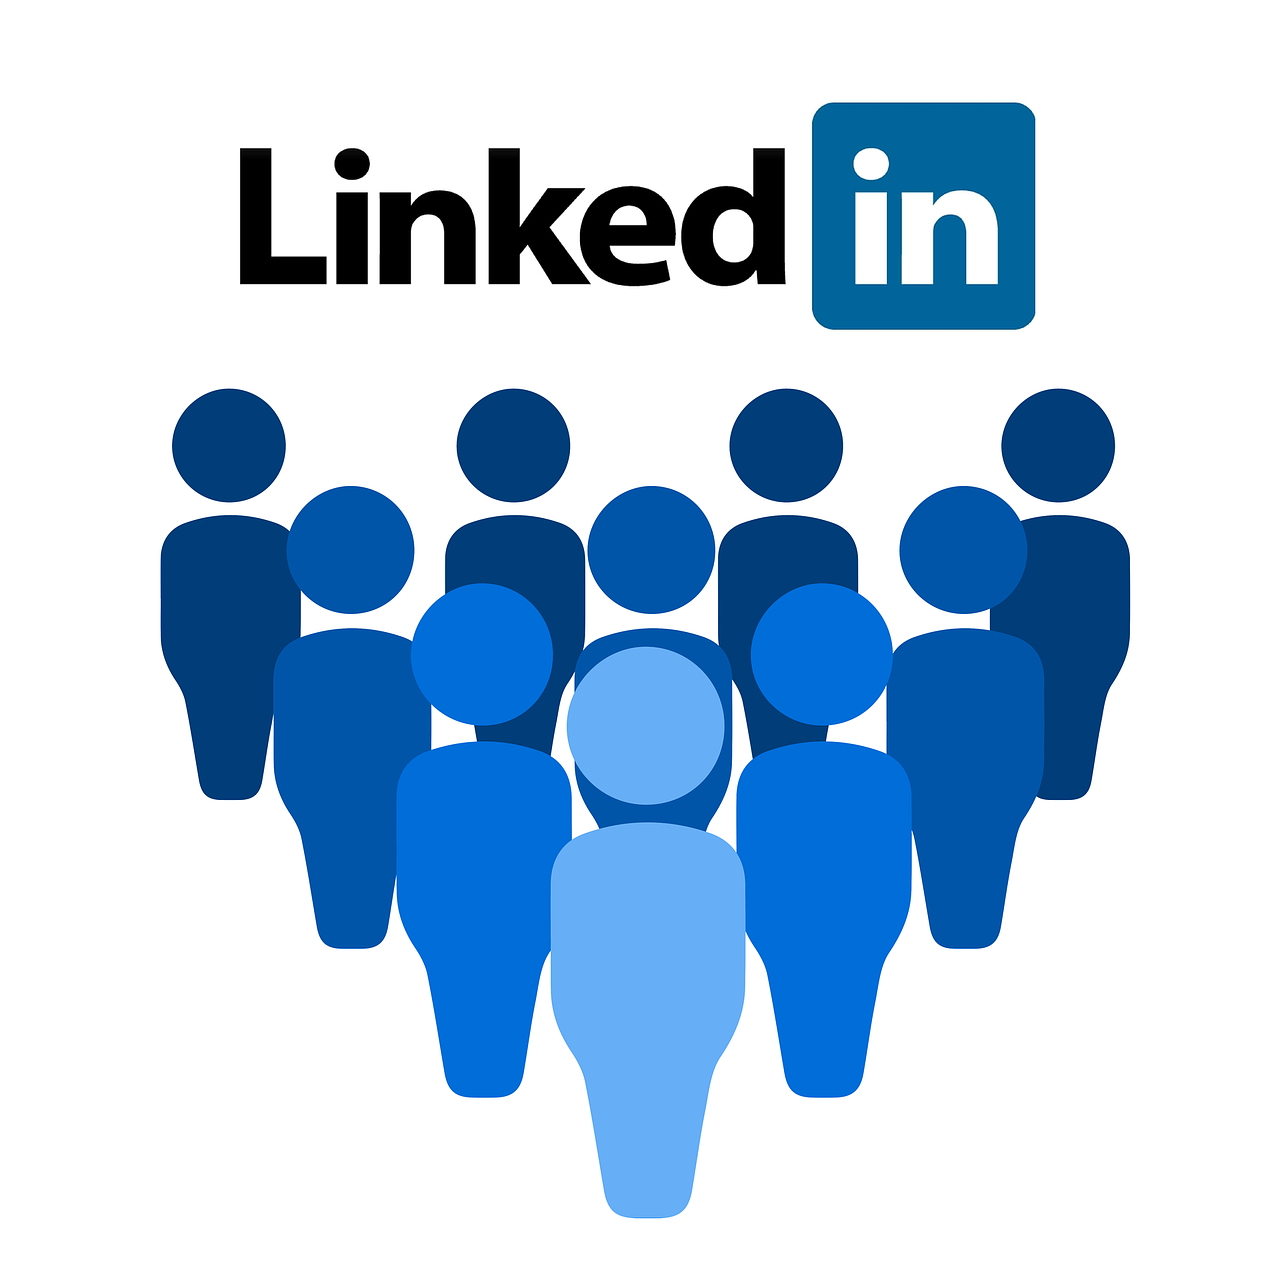 Why LinkedIn is The Most Important Channel for B2B Marketers